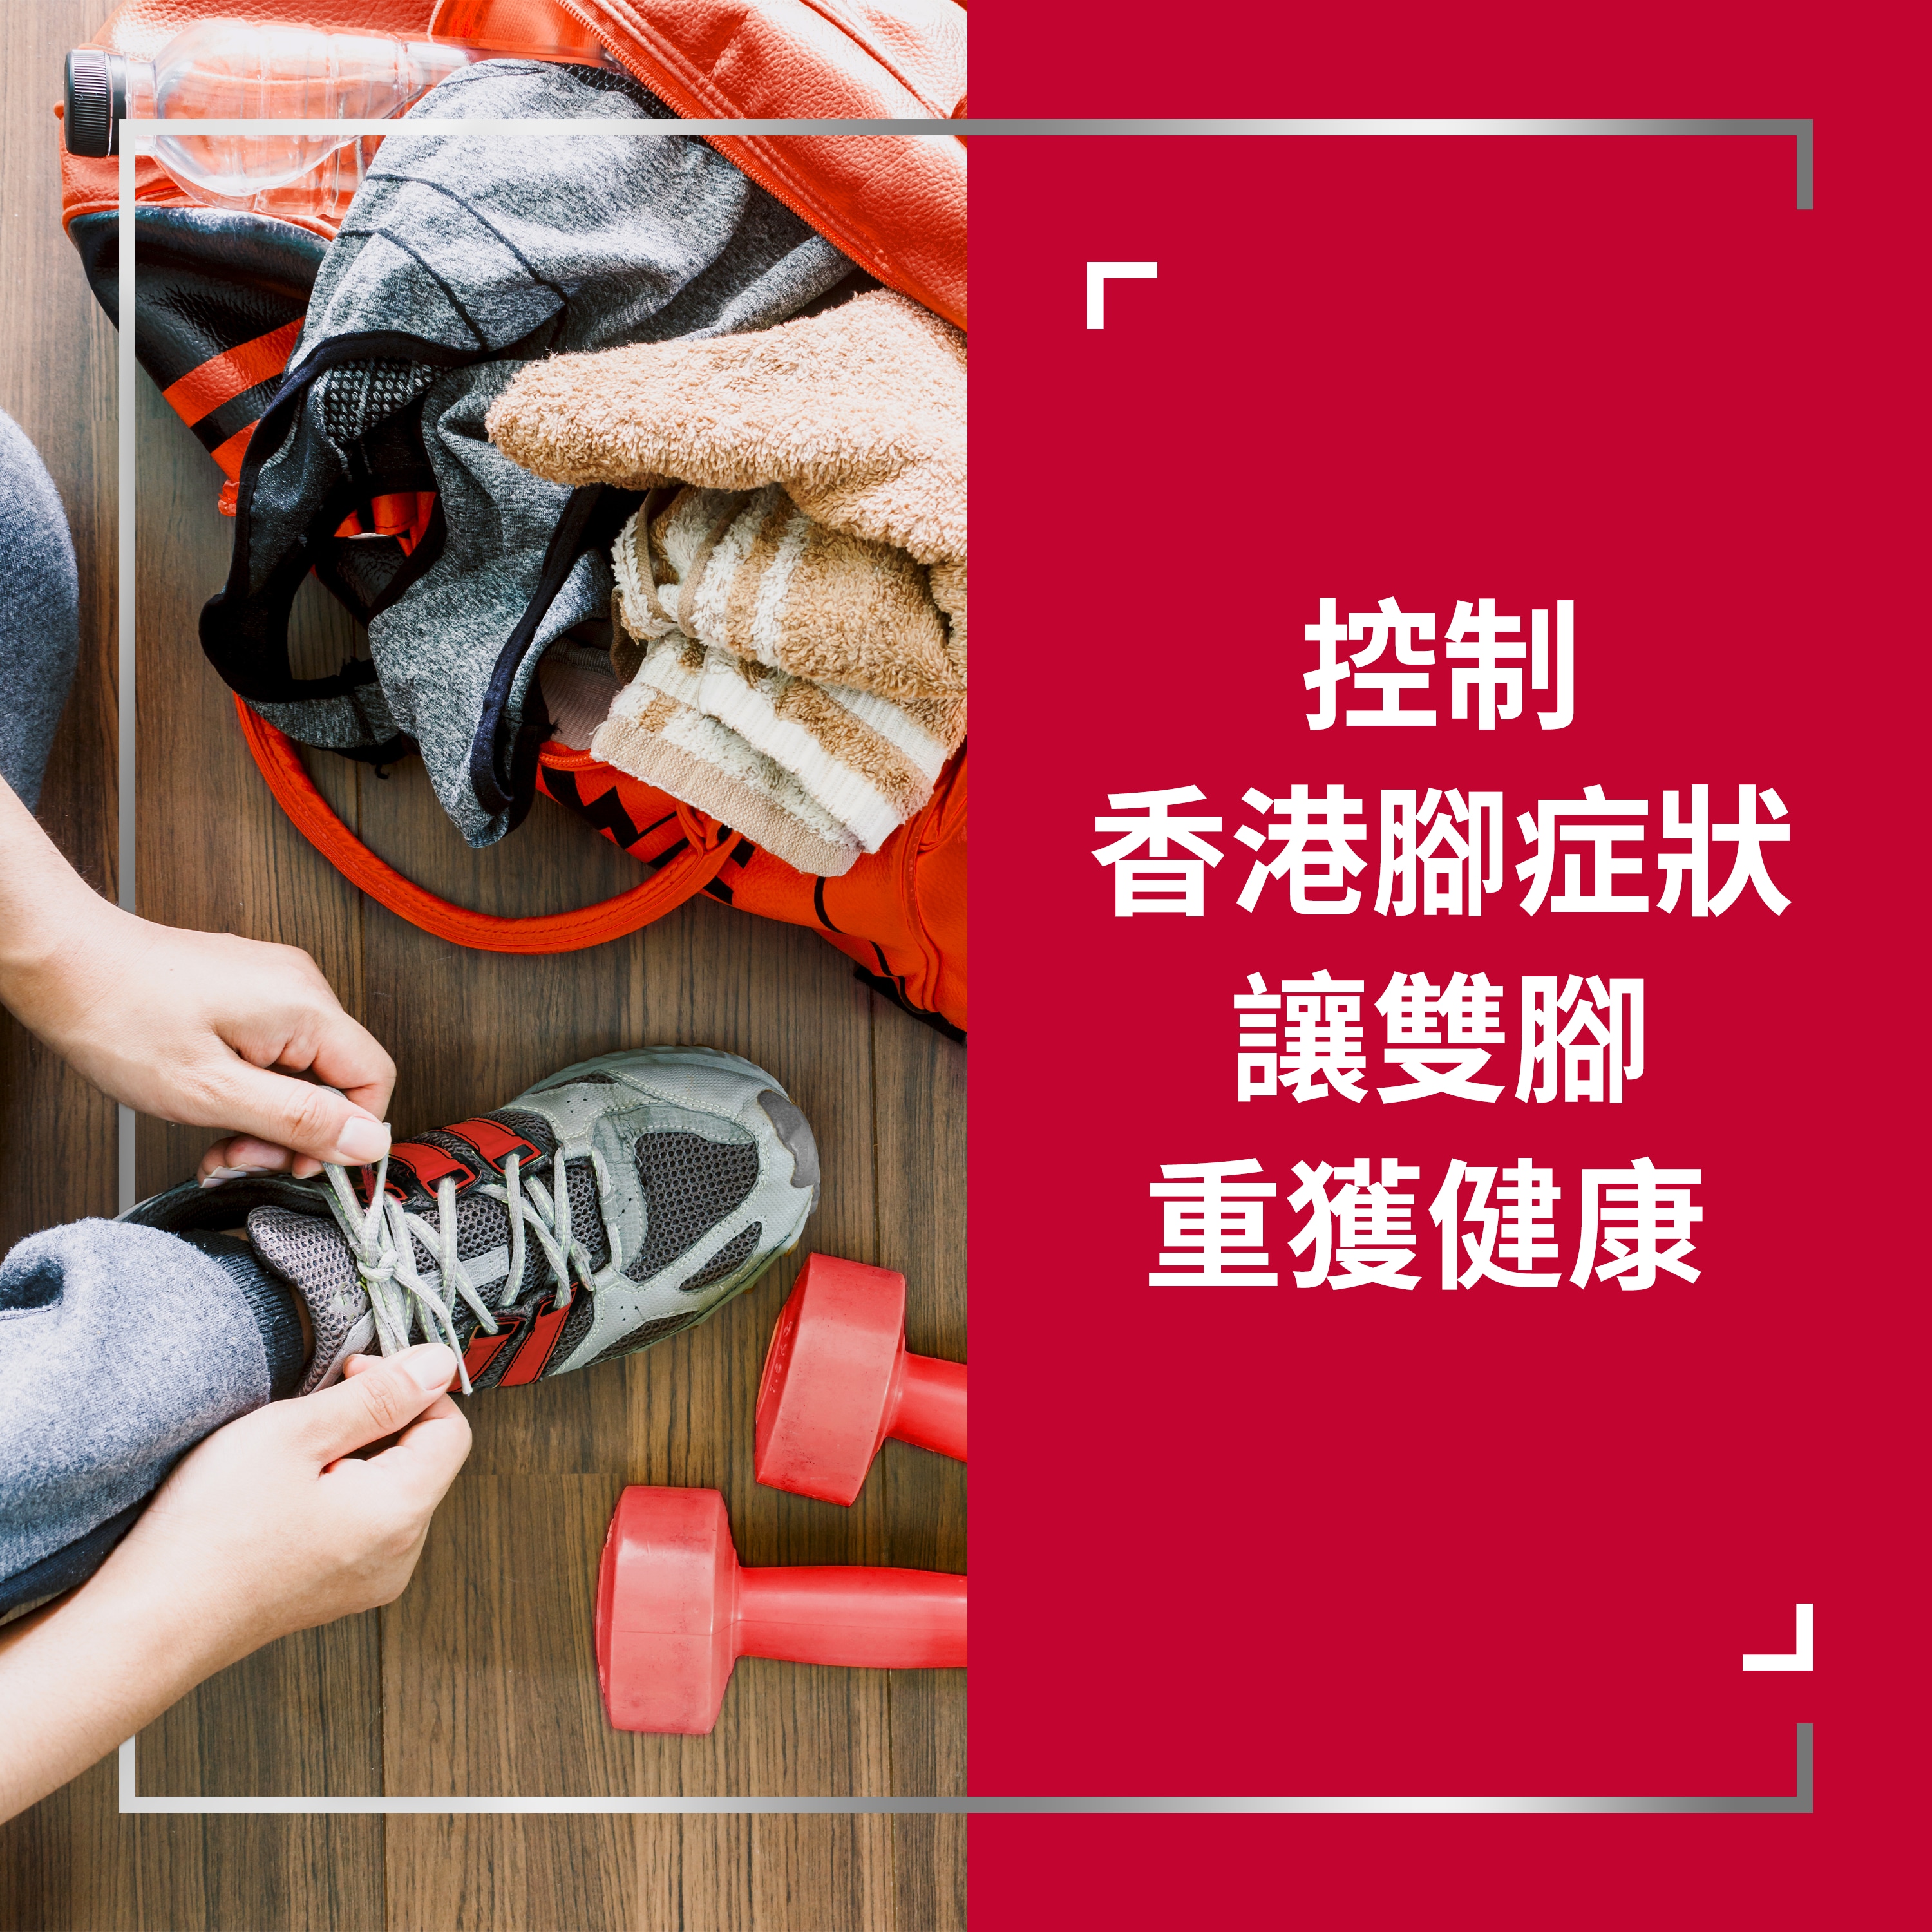 Active person tying grey shoe next to lying dumbbells in gym, with caption on the right: Take control of athlete’s foot and help your feet get healthy